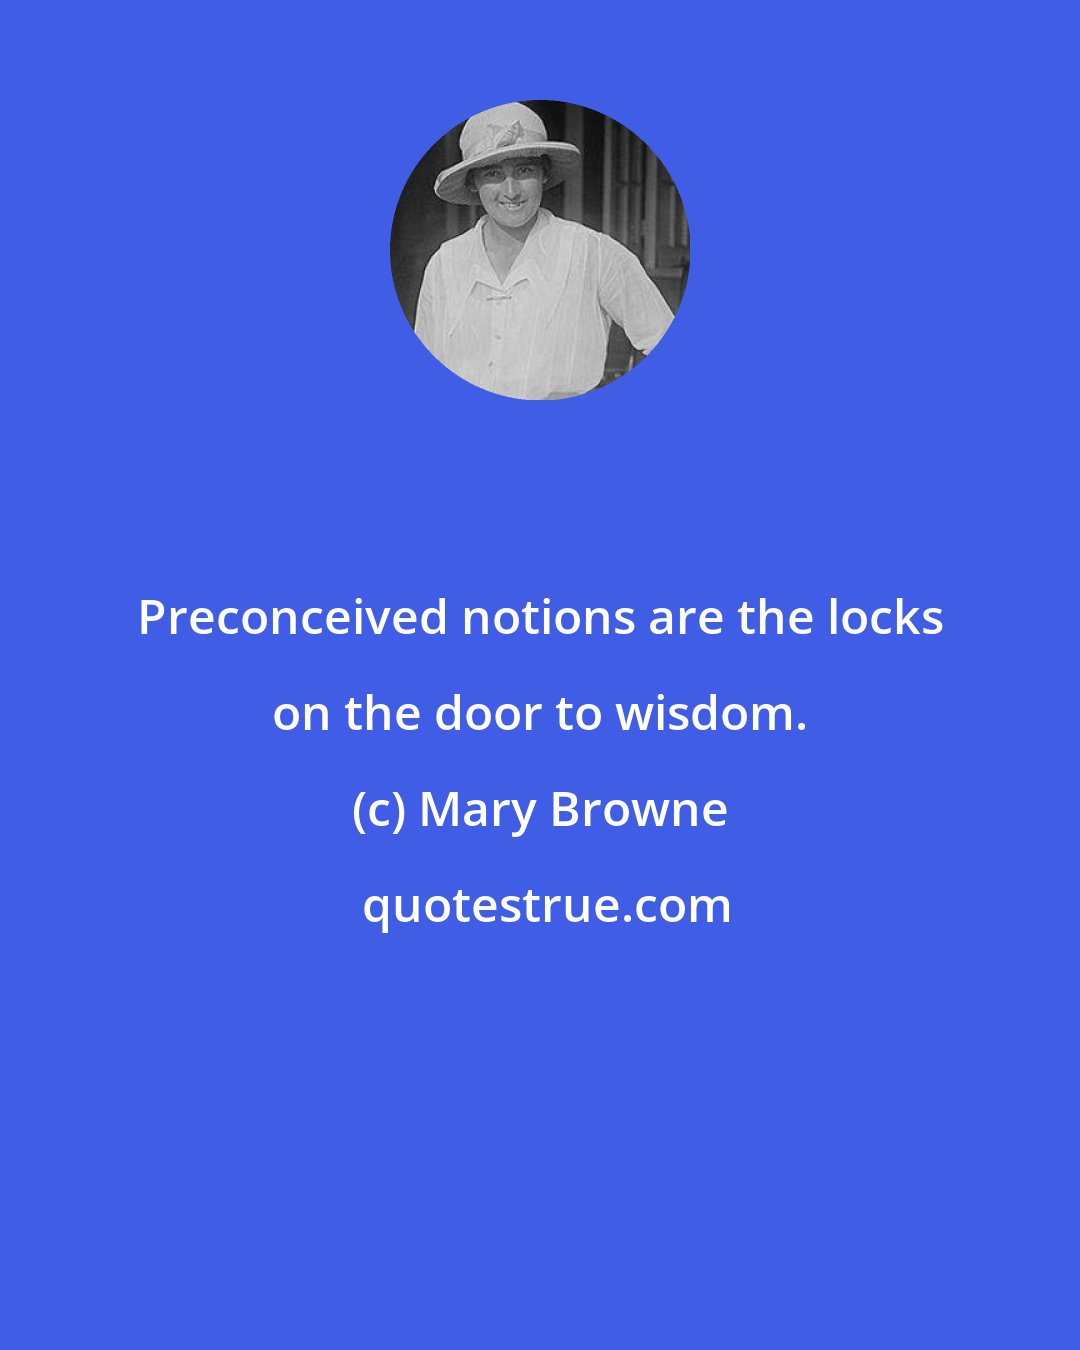 Mary Browne: Preconceived notions are the locks on the door to wisdom.